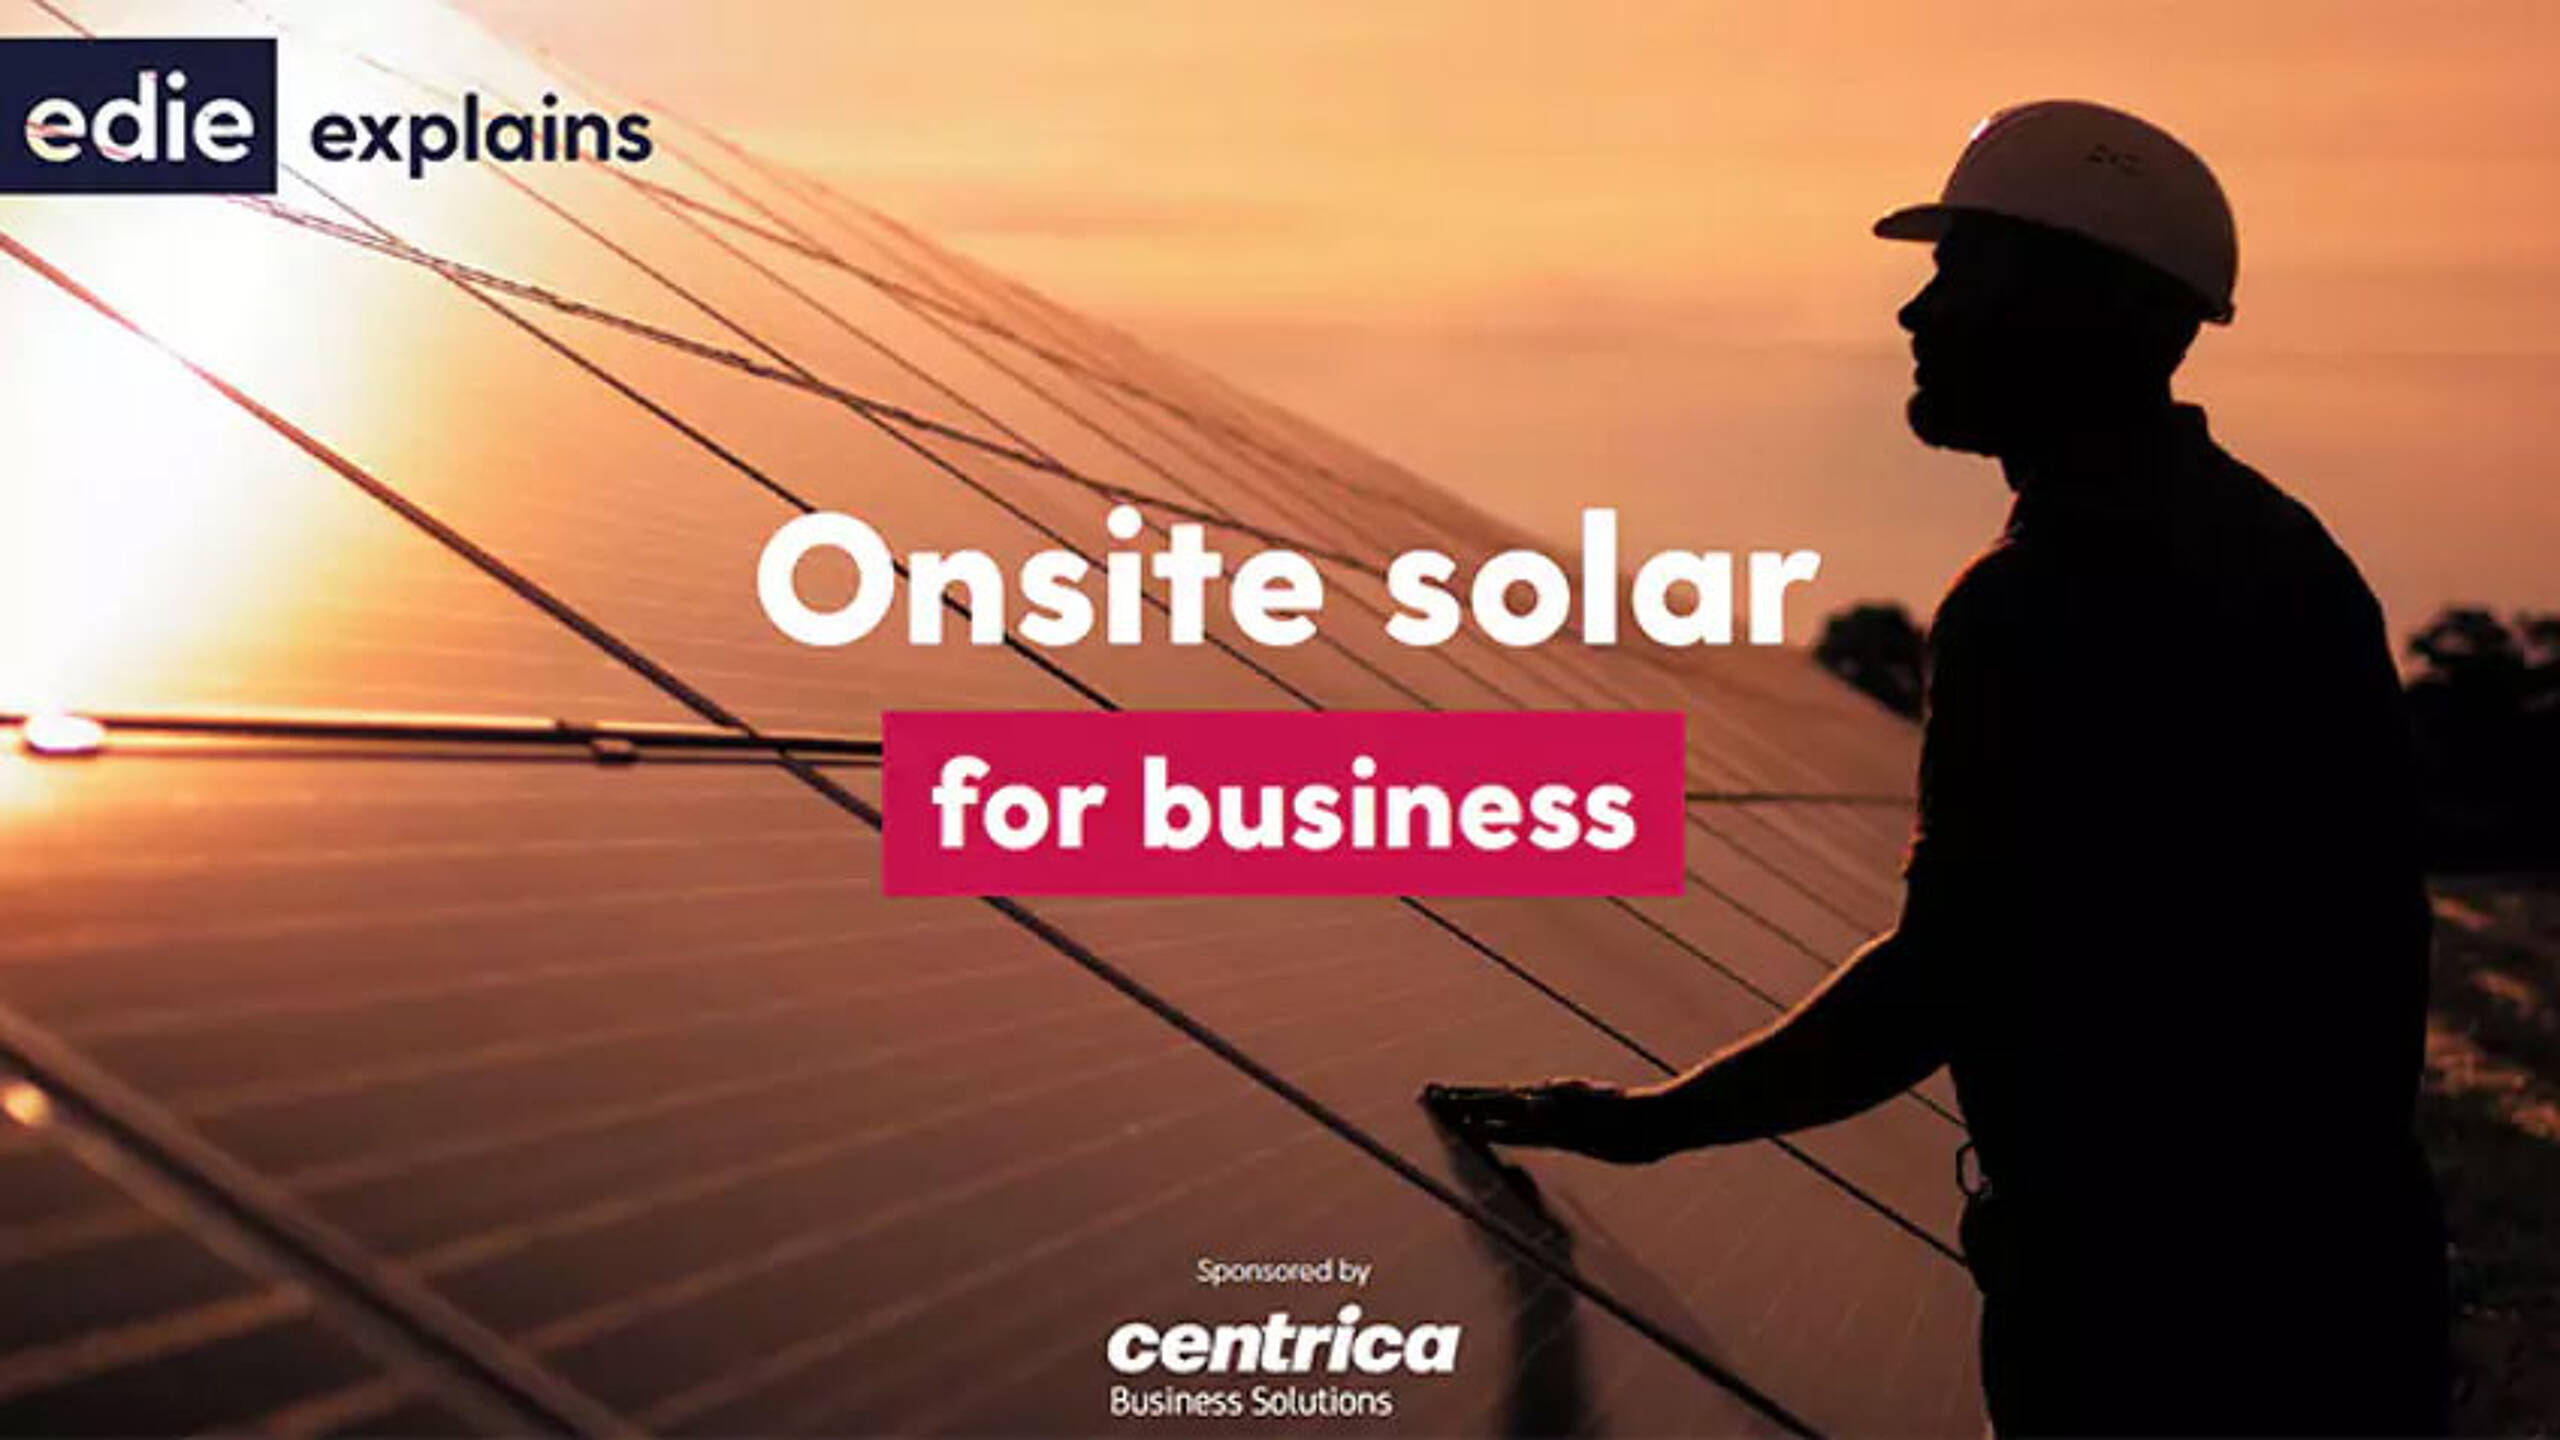 edie launches new guide on onsite solar for businesses